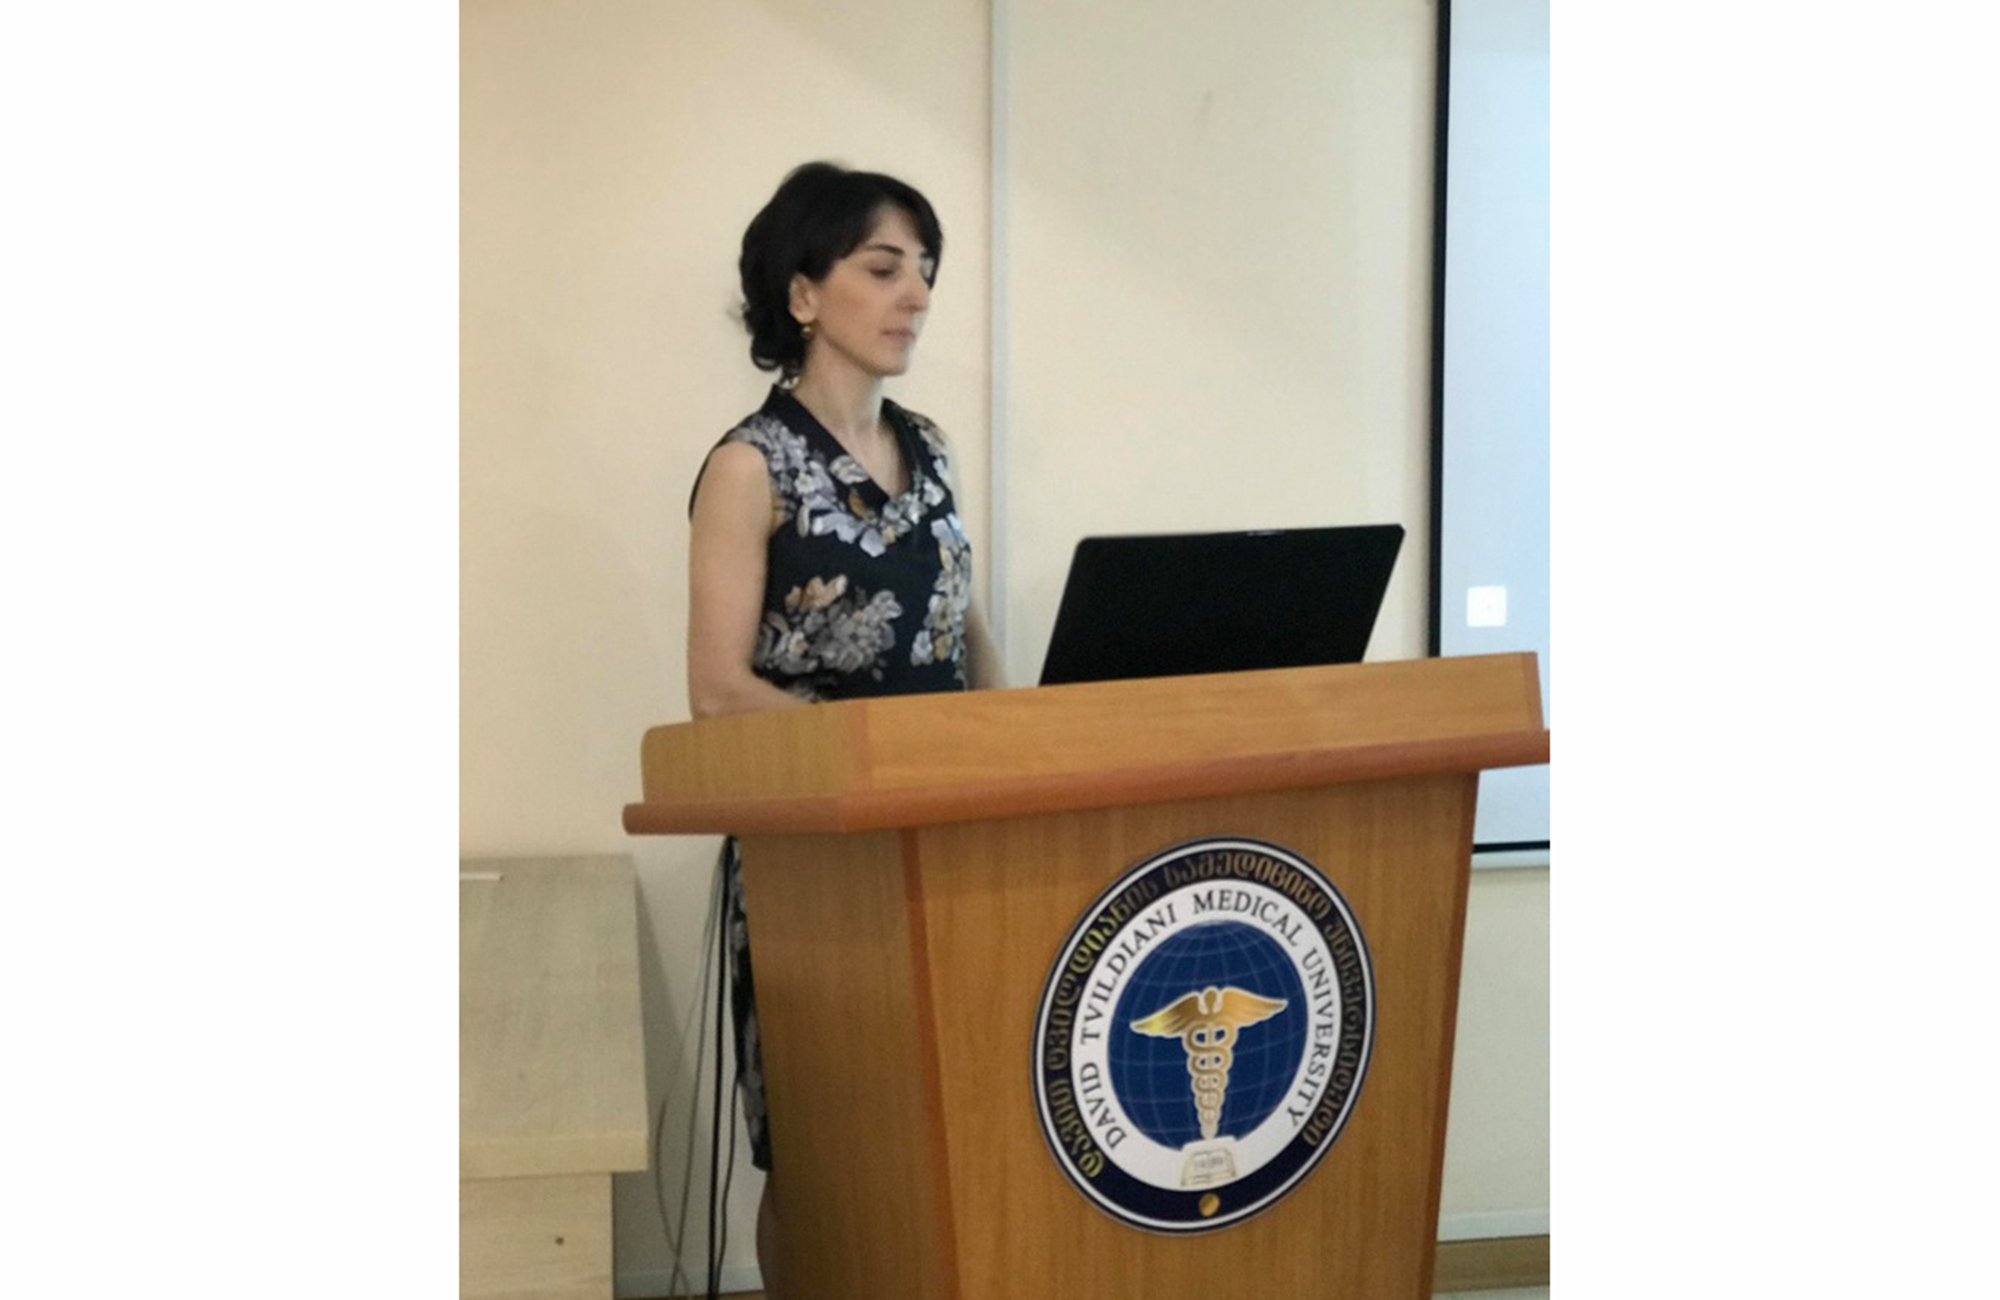 The dissertation defense of PhD candidate Tamar avalini with title ,,Myeloperoxidase in Chronic Heart Patients : Correlation with Nutritional State, Inflammation, Cardiac Remodelin and Disease Outcome ”